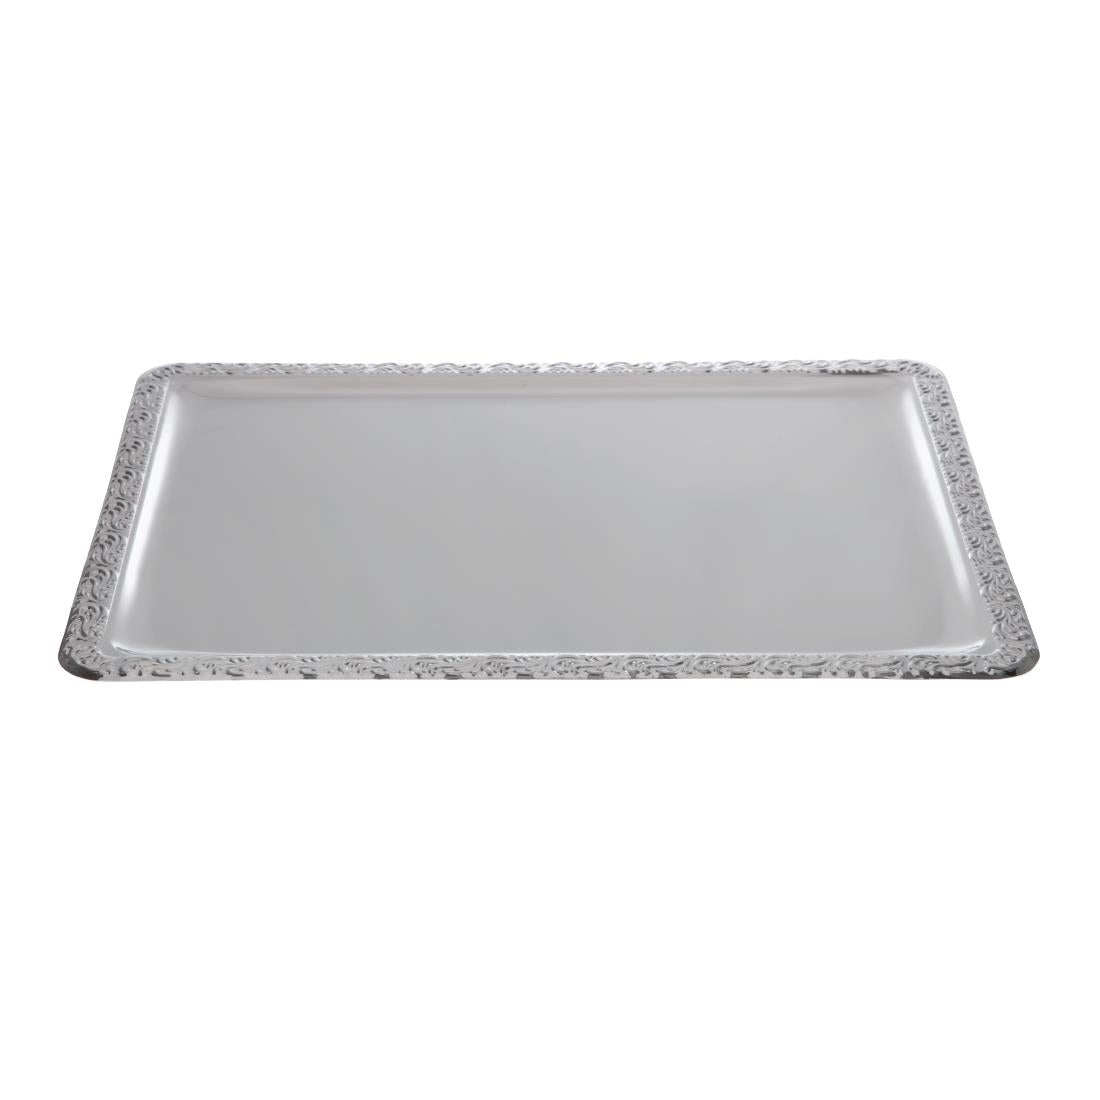 P006 APS Stainless Steel Rectangular Service Tray 500mm